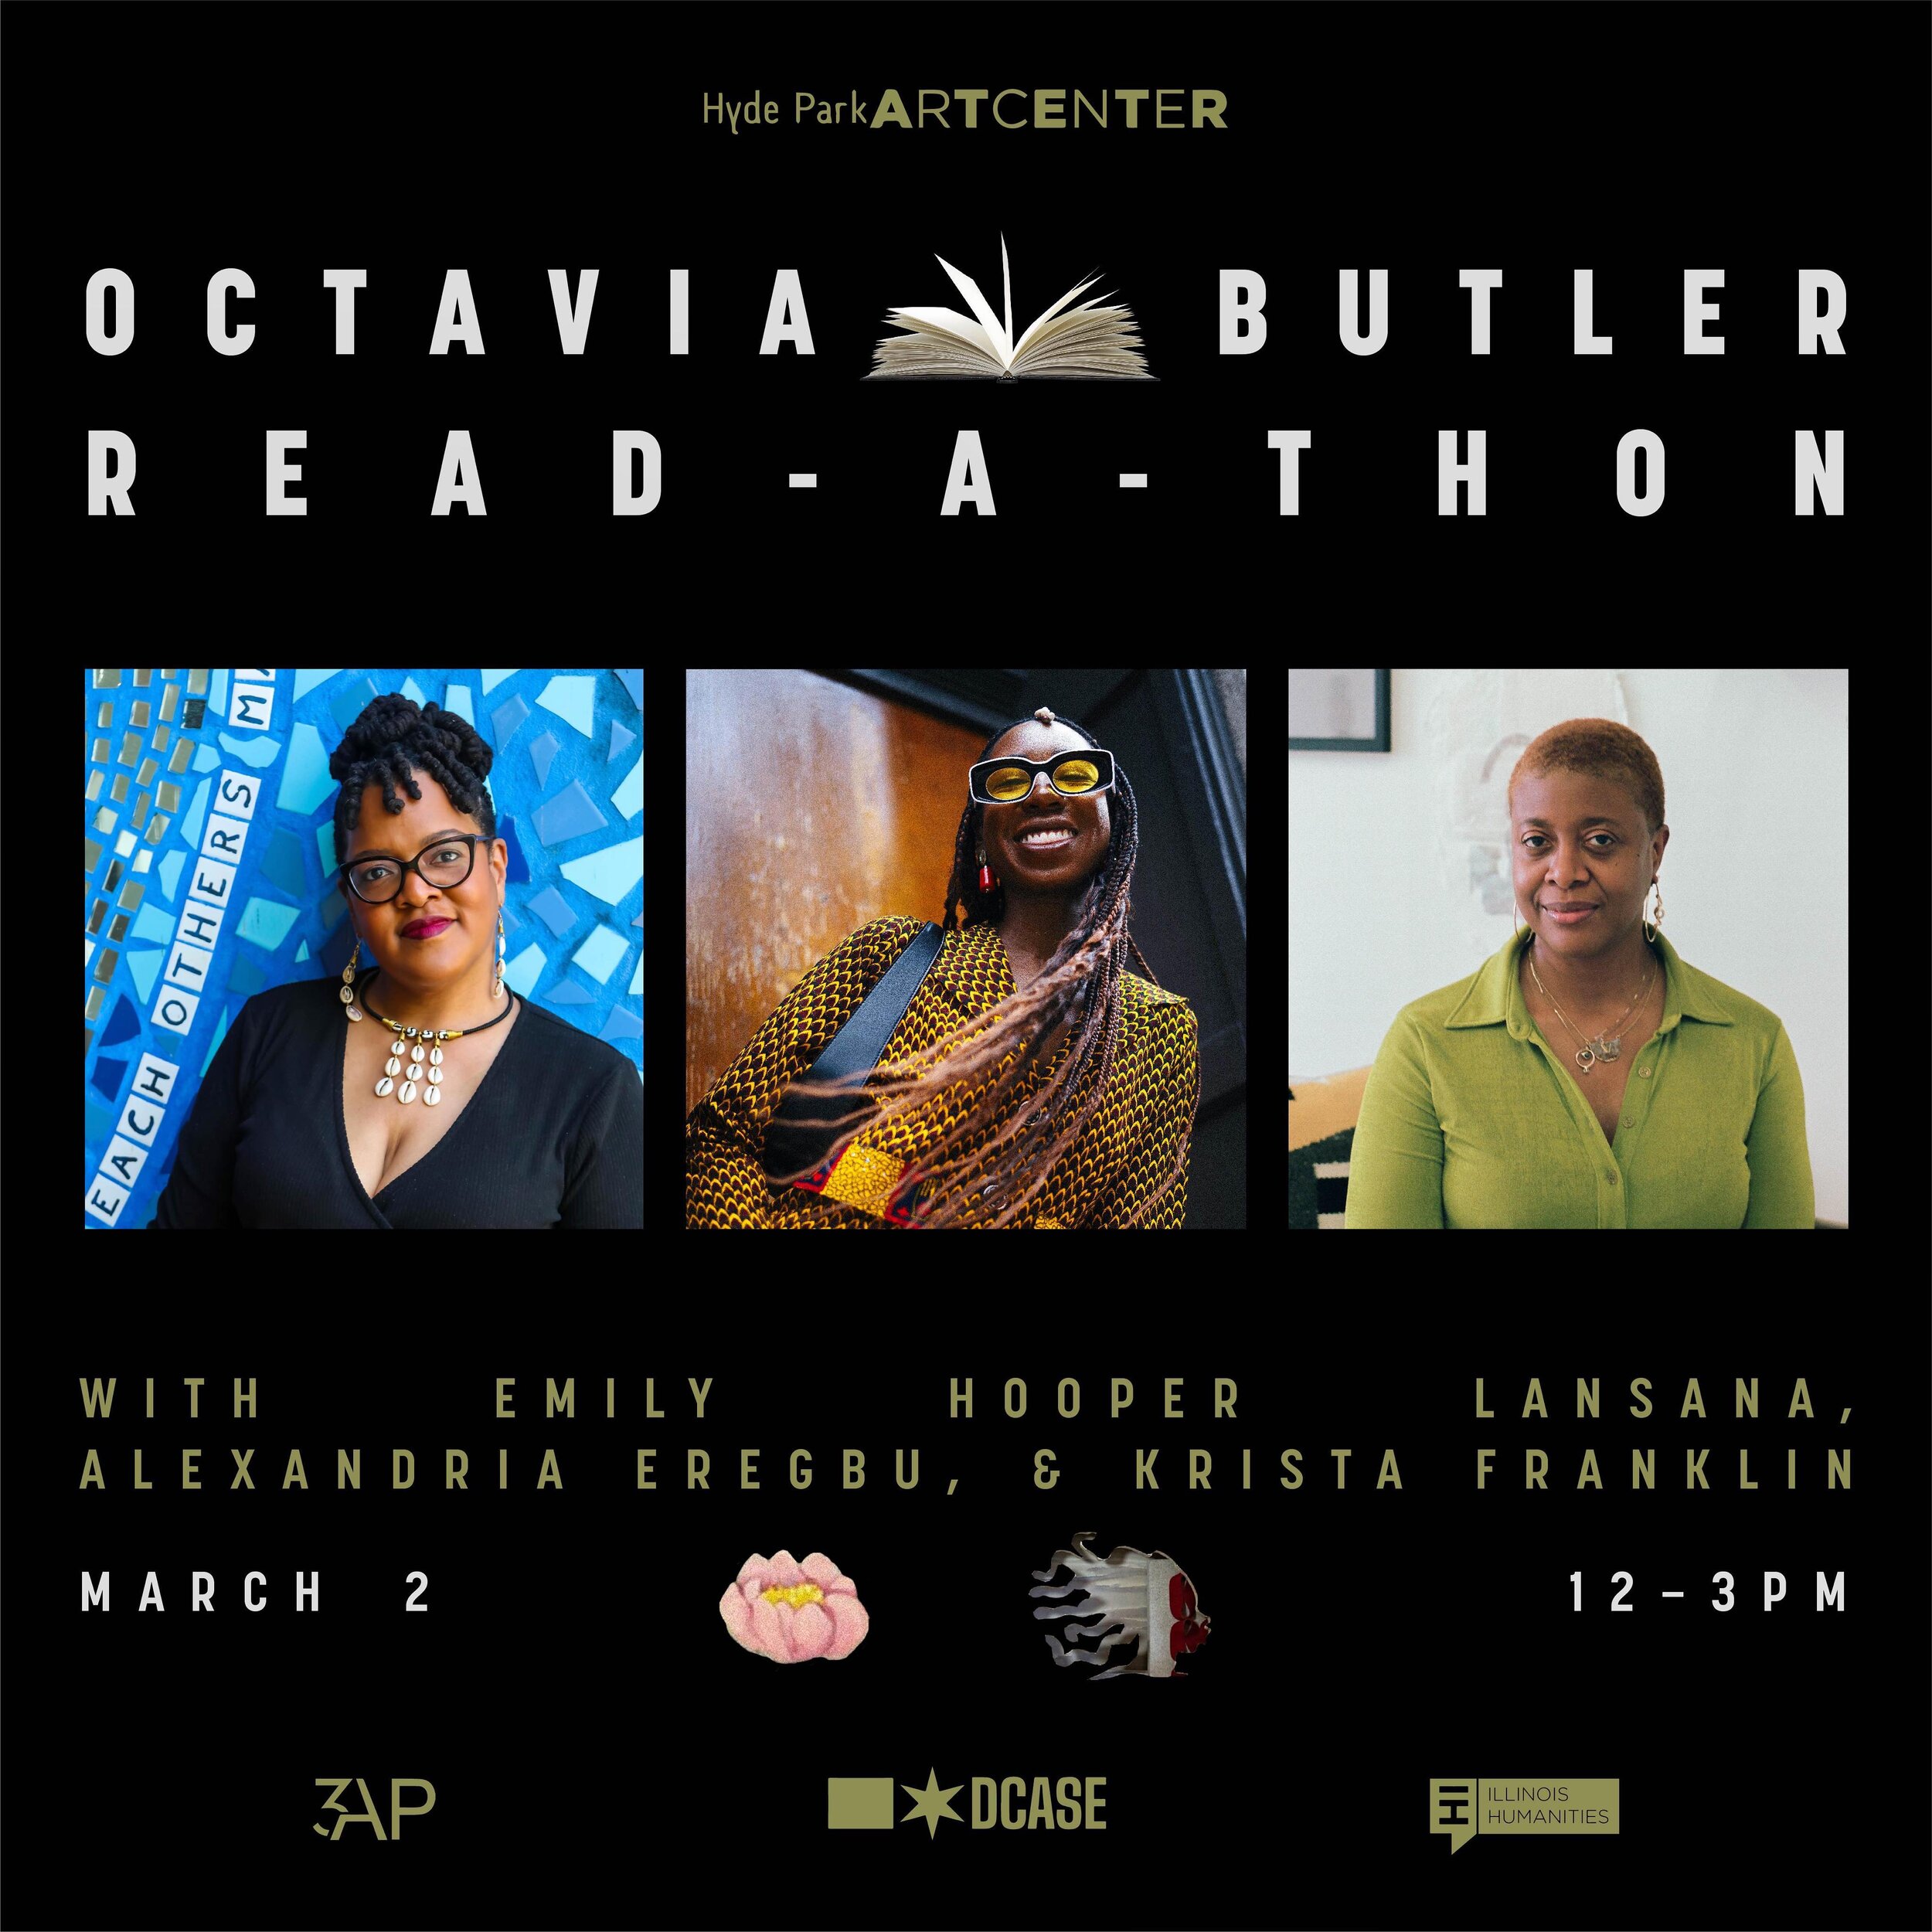 TOMORROW from 12-3PM @hydeparkartcenter ⭐️

I could not imagine a more beautiful way to kick off Women&rsquo;s Month than to join friends @emilylansana @therealkristaf at Hyde Park Art Center for the Octavia Butler Read-A-Thon 📚 as part of the closi